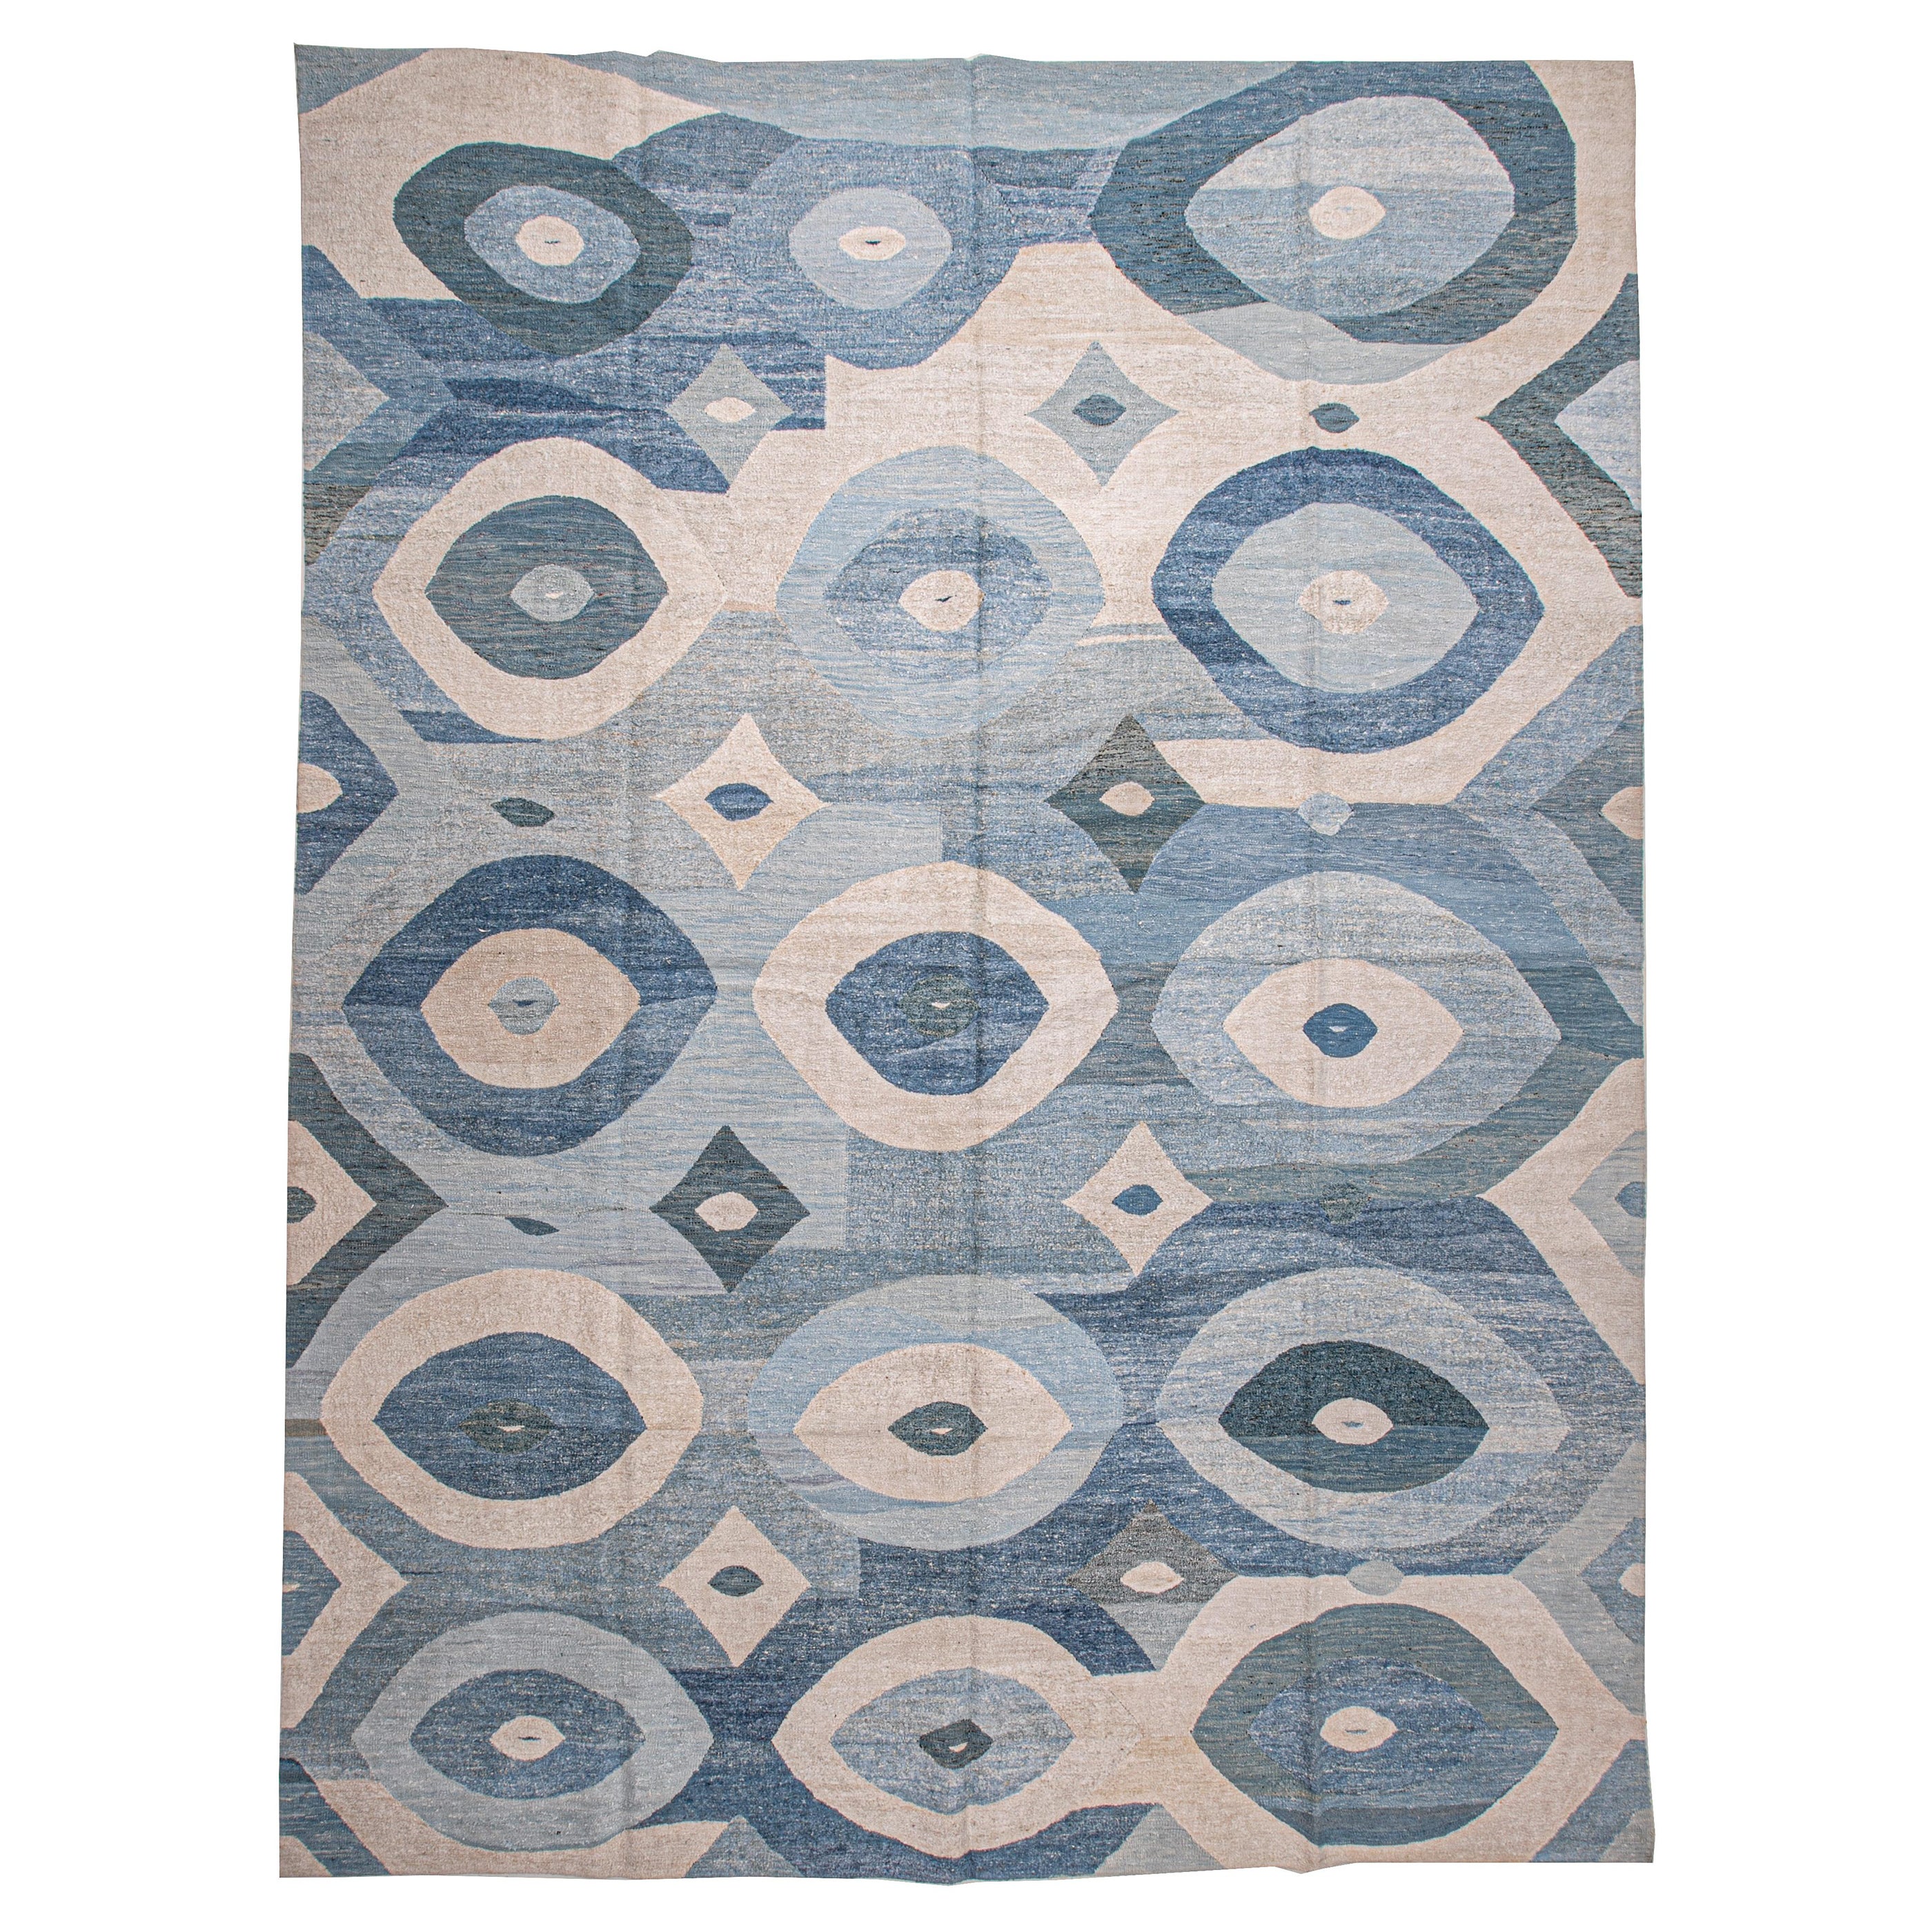 Contemporary Turkısh Kilim Made from Recycled Hemp and Wool